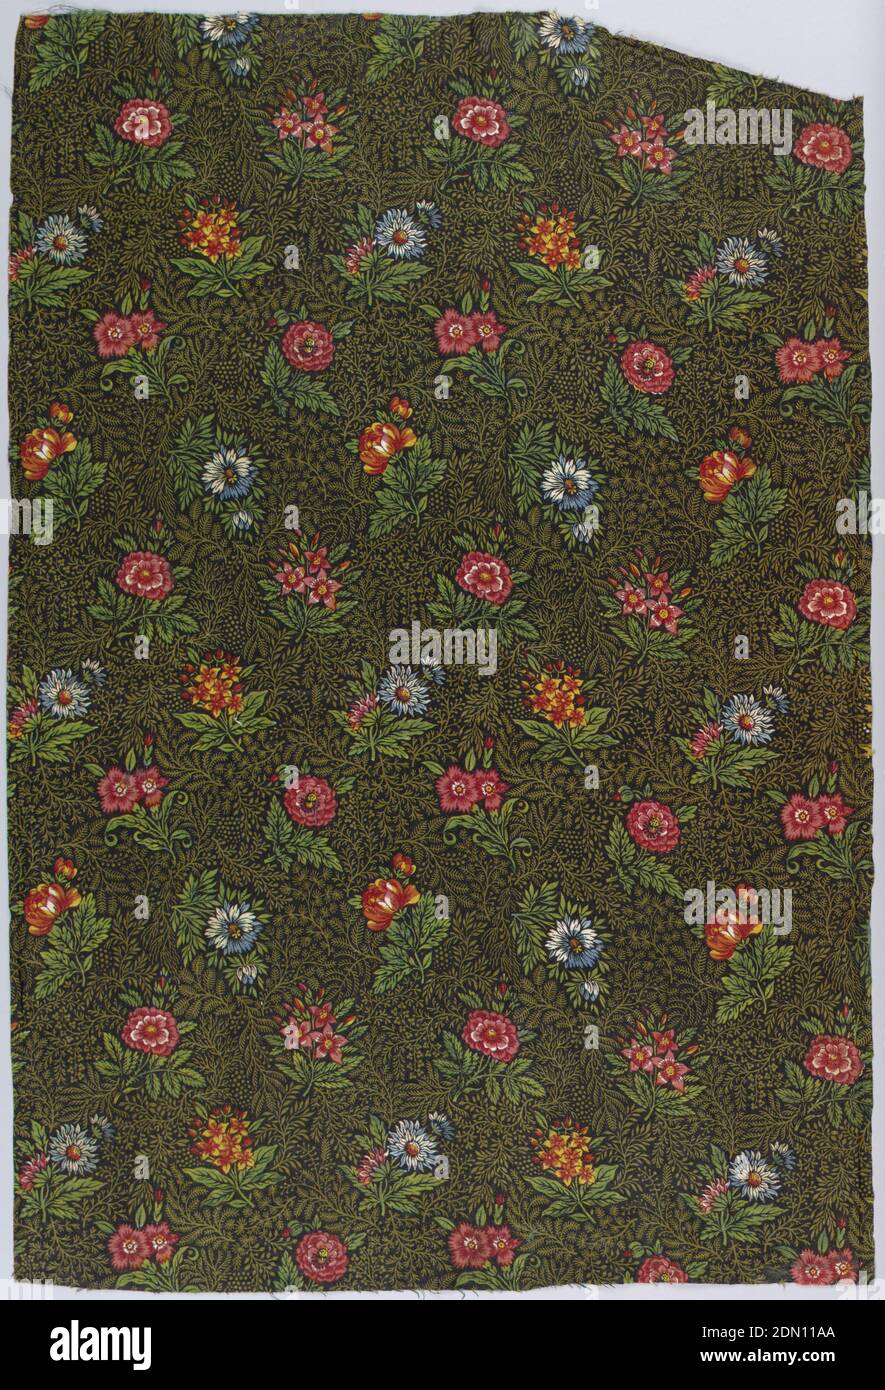 Textile, Medium: cotton Technique: block printed, Sprigs of red and blue flowers scattered over a ground print of fine foliage patterns densely drawn in brown on a black ground. Right selvedge intact., France, ca. 1790, printed, dyed & painted textiles, Textile Stock Photo